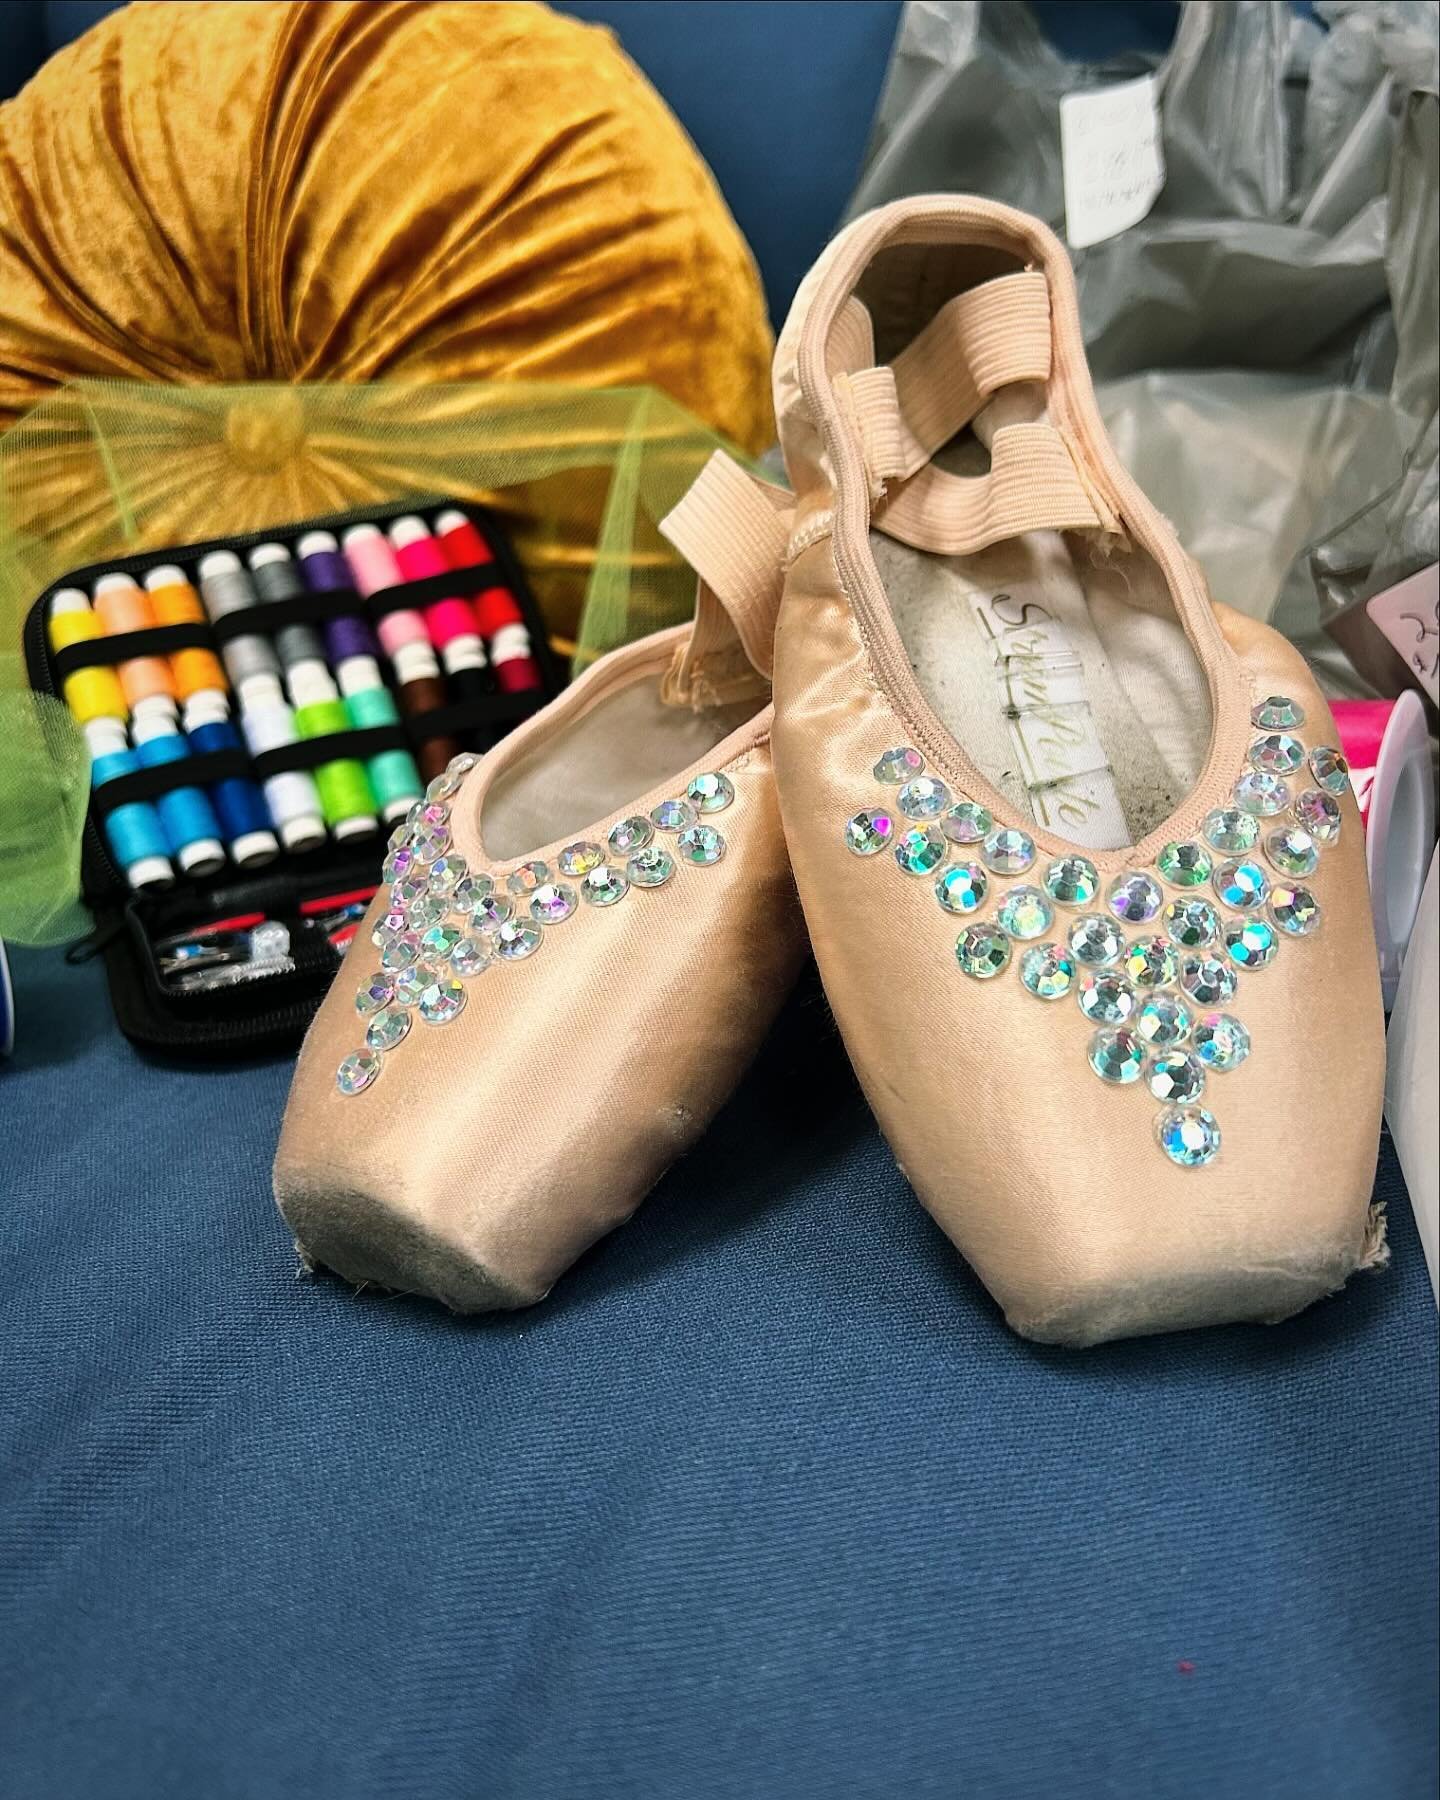 It&rsquo;s beginning to look a lot like&hellip;&hellip;. SHOWTIME!!!! 🤩

#cinderella #finaltouches #sewing #rhinestones  #ballet #pointeshoes  #ballet #performance #june #2024 #florida  #dancestudio #tickets #ticketsonsale #performingarts